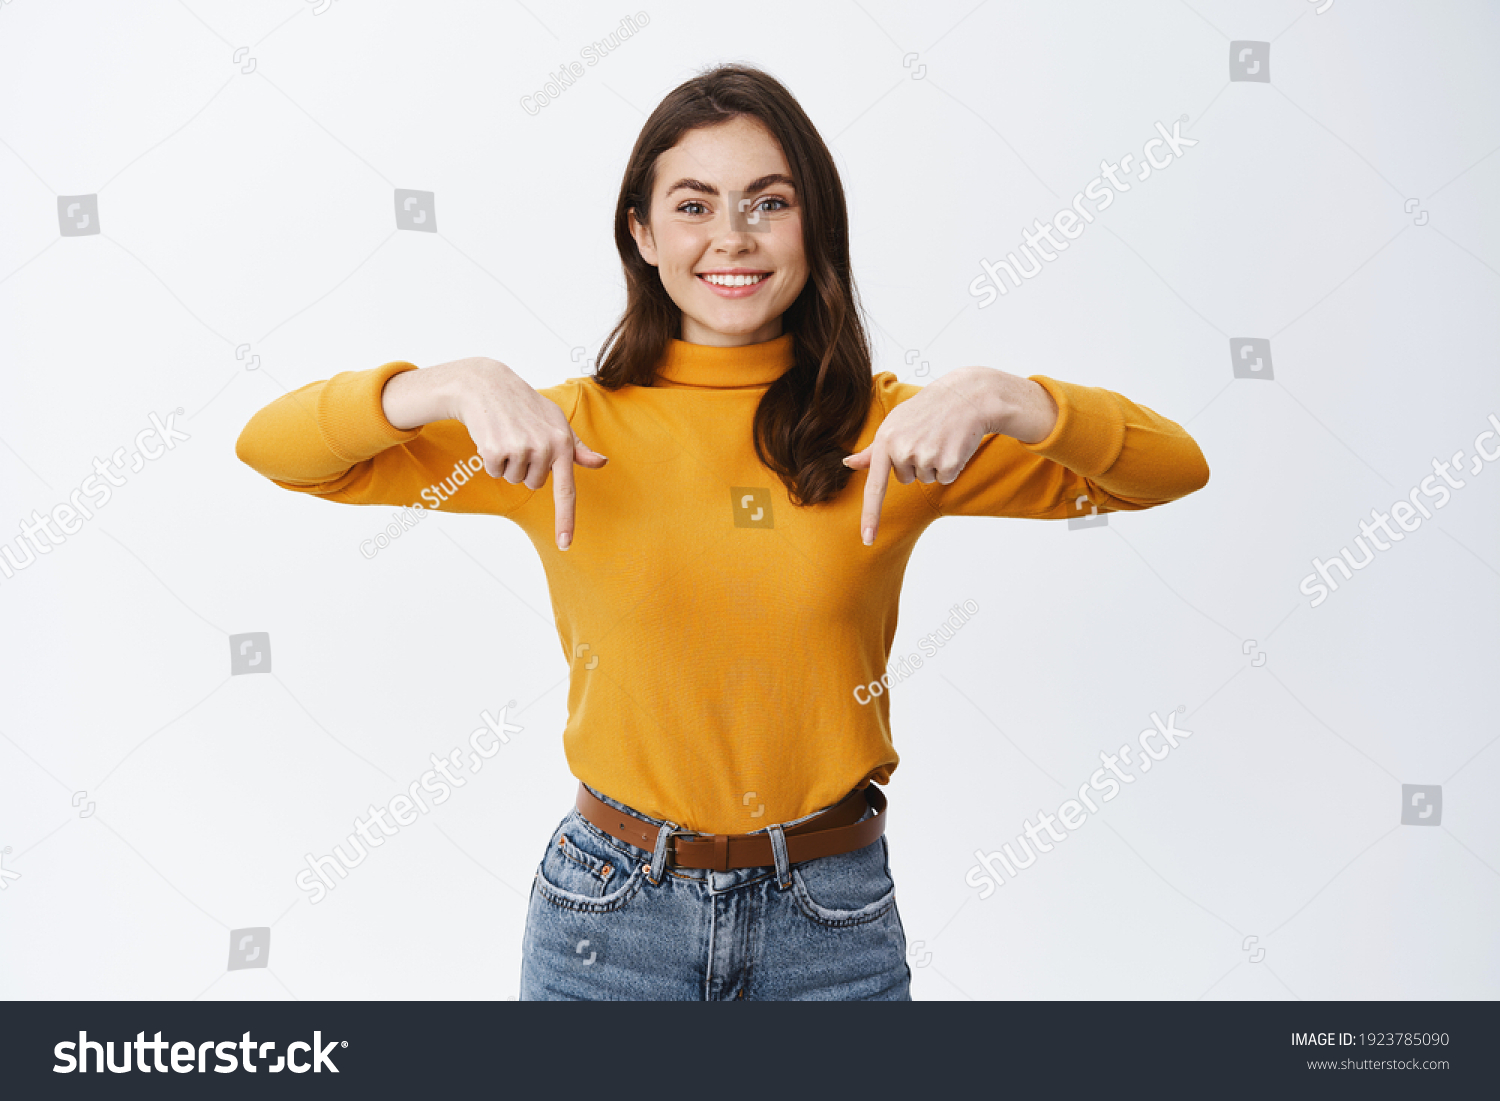 Smiling confident girl pointing fingers down to show advertisement, showing promo offer on bottom empty space, standing against white background. #1923785090